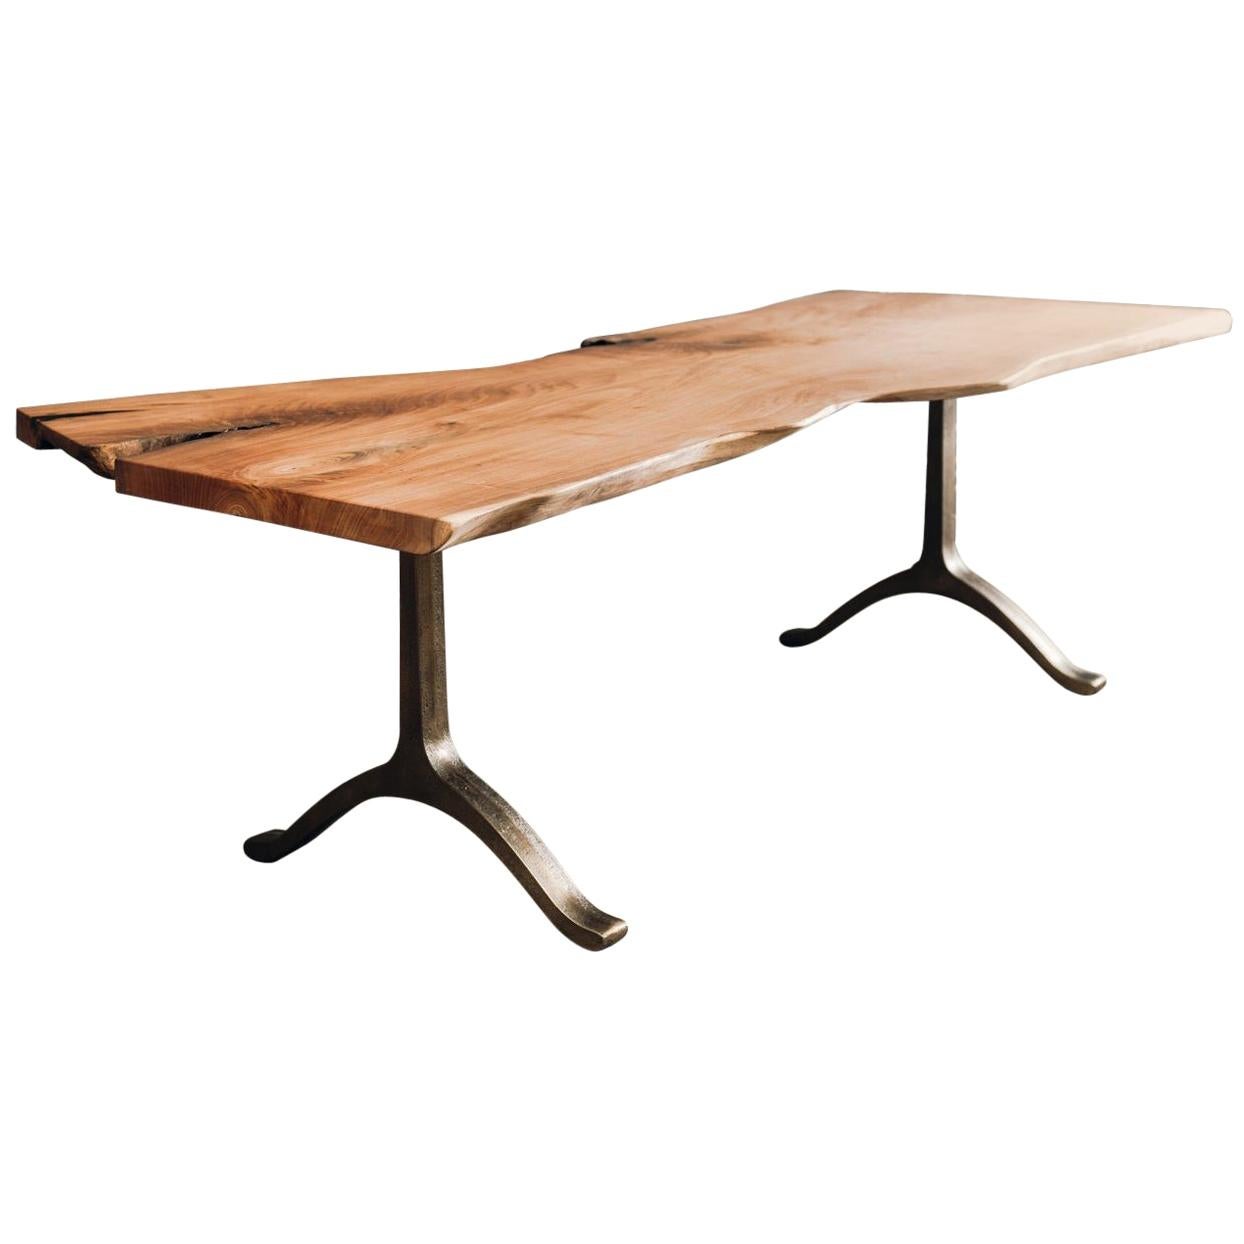 Live Edge Slab Desk with Bronze-Plated Cast Iron Legs by Hopes Woodshop